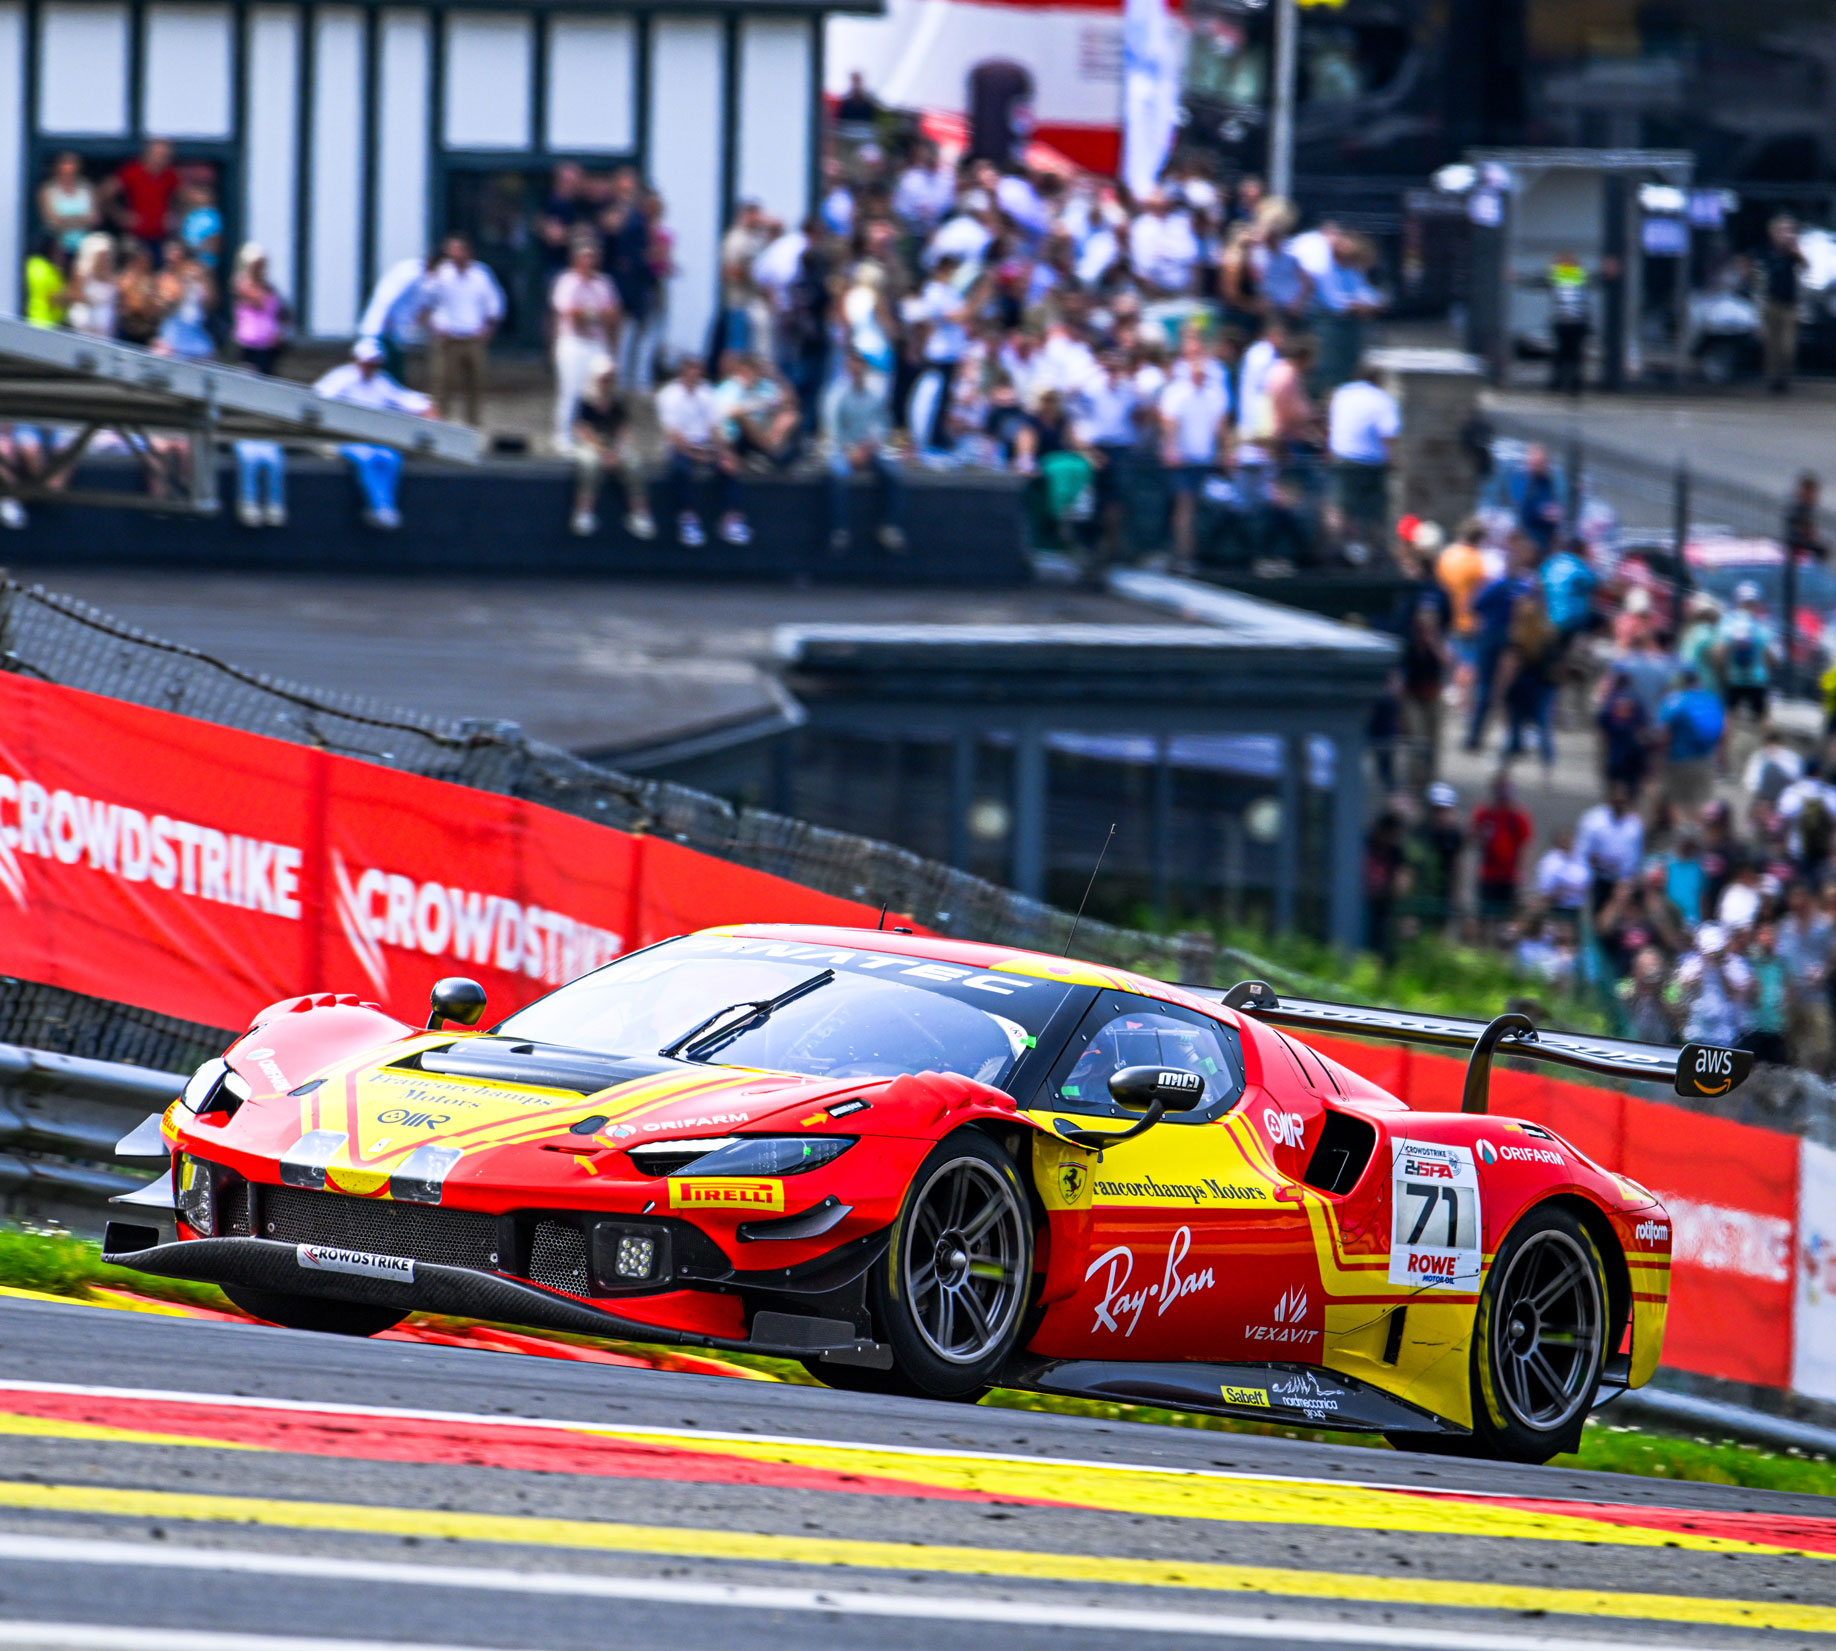 GT ROOKIE VIDALES PRODUCES EXCELLENT RACE IN SPA 24-HOUR DEBUT